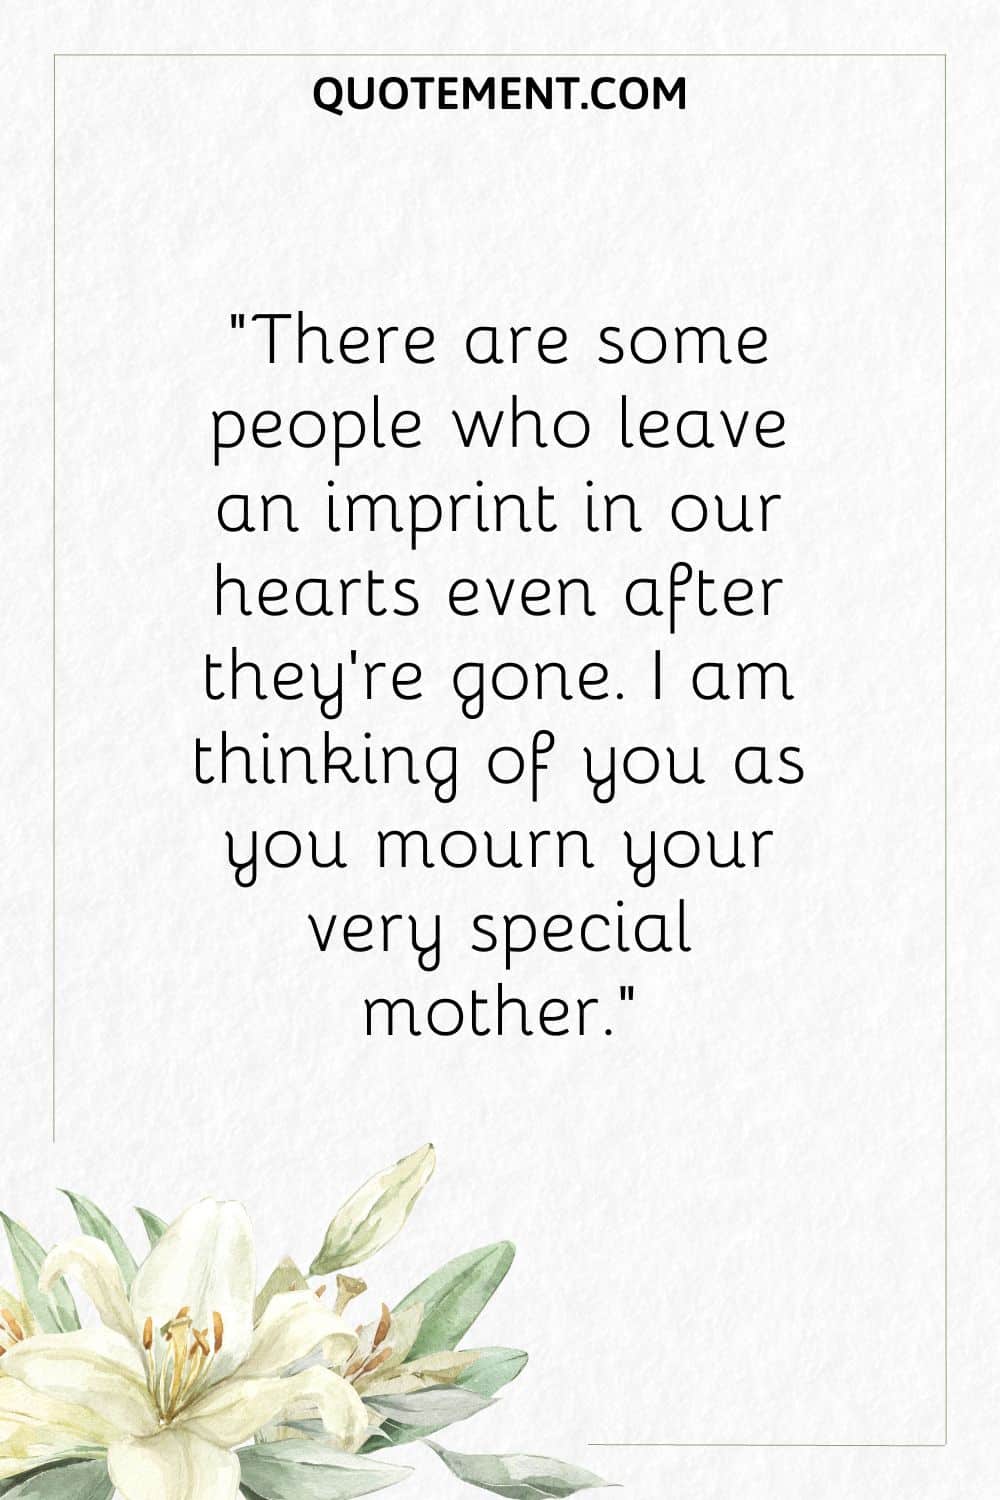 white lilies image representing thinking of you loss of mom message
